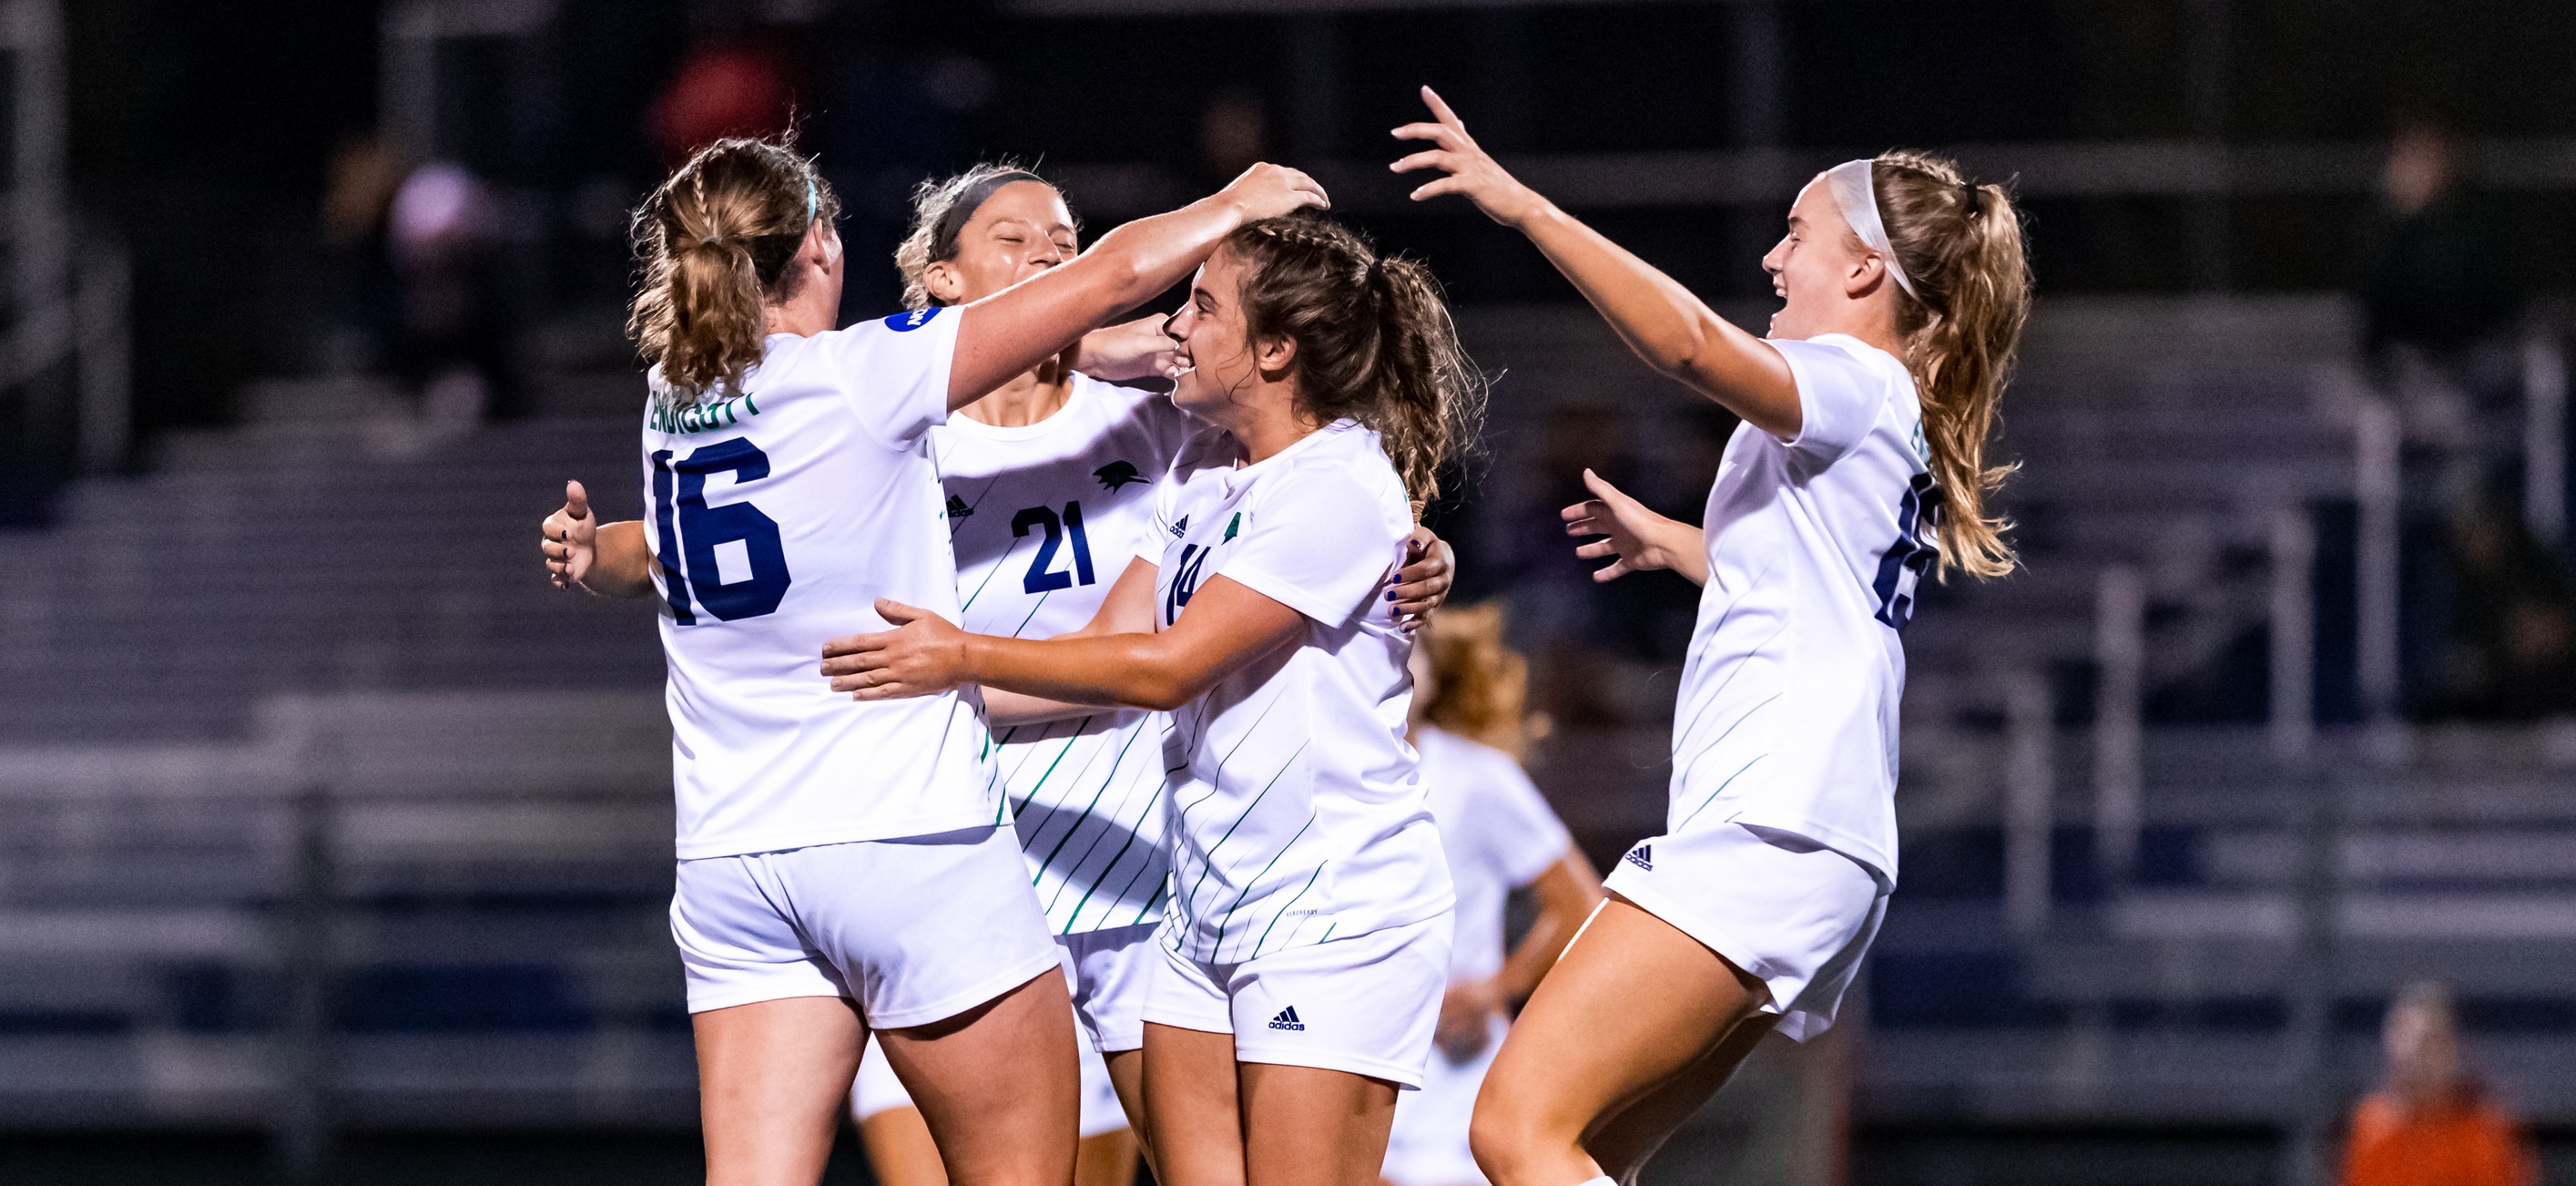 Members of the women's soccer team celebrate a goal against Wheaton on Wednesday night.